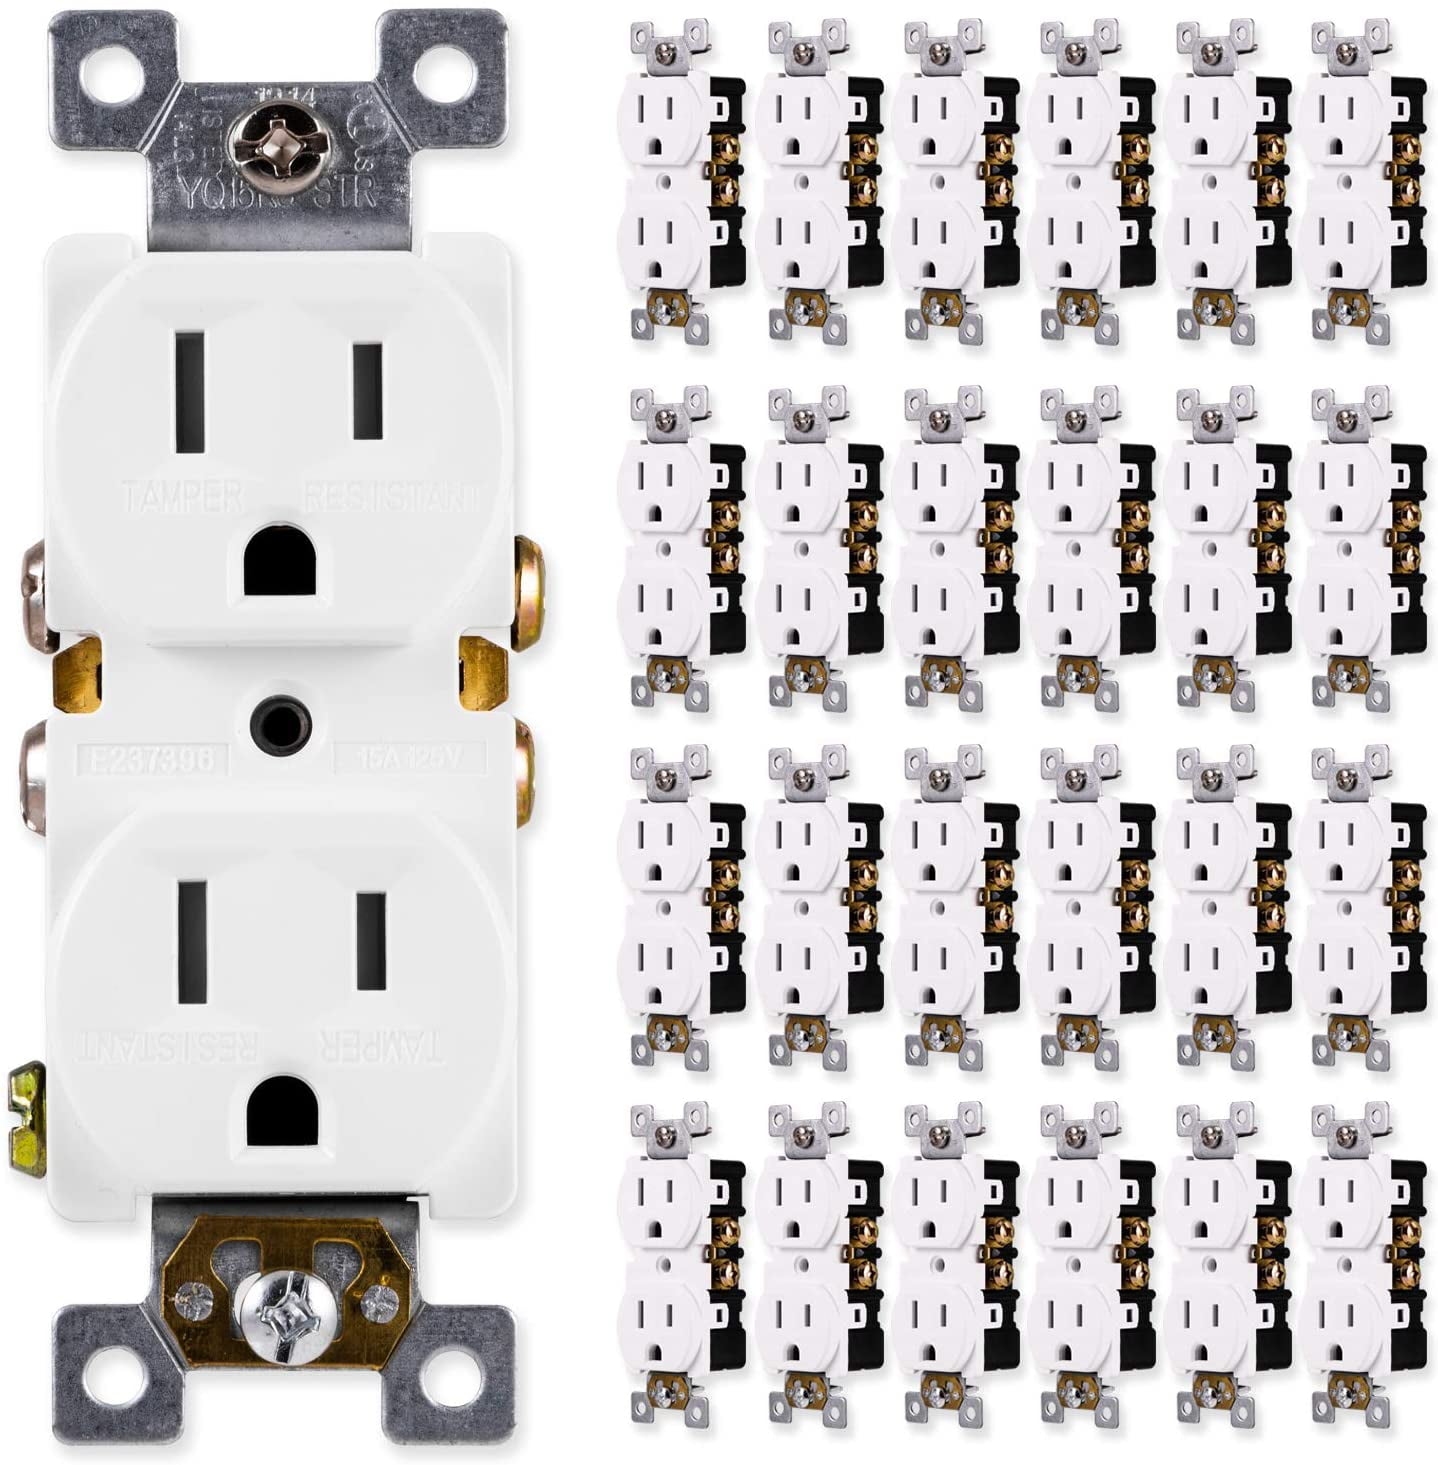 AllTopBargains HH051 36 Pack Outlet Plug Covers Safety Electrical Covers Protectors Baby Child Proof